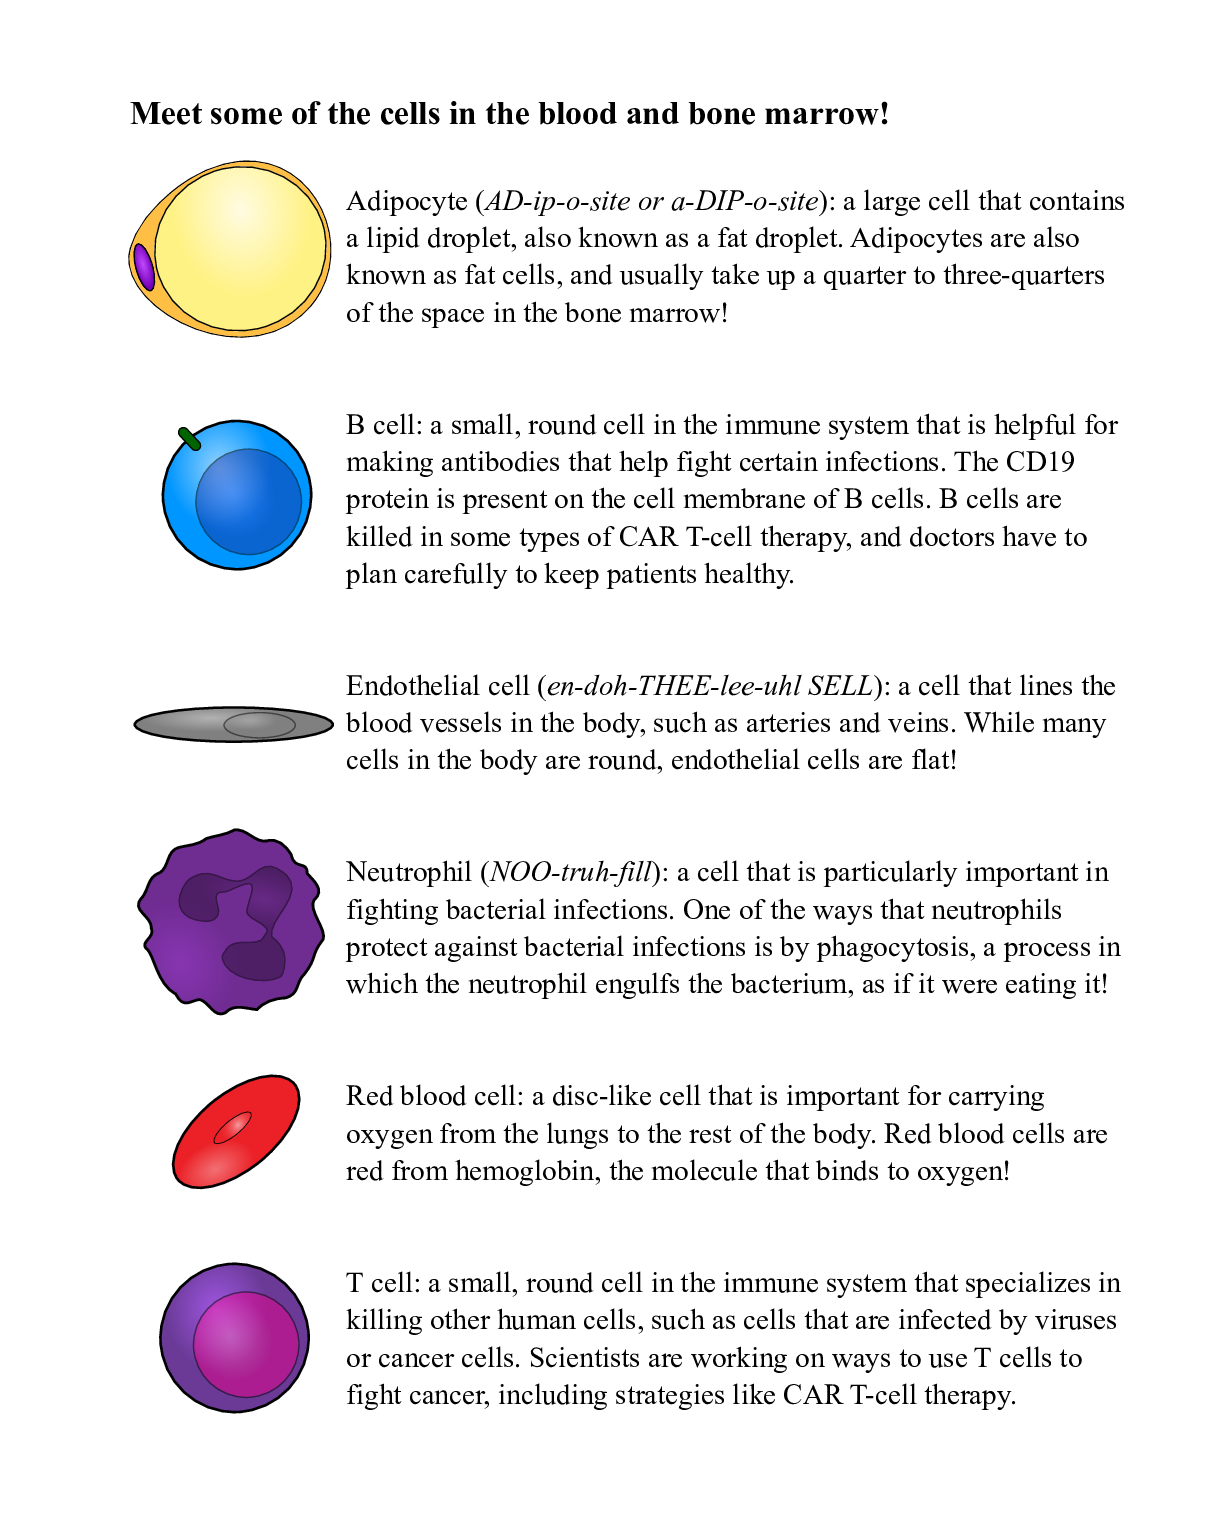 Page 33 (Meet the Blood Cells)